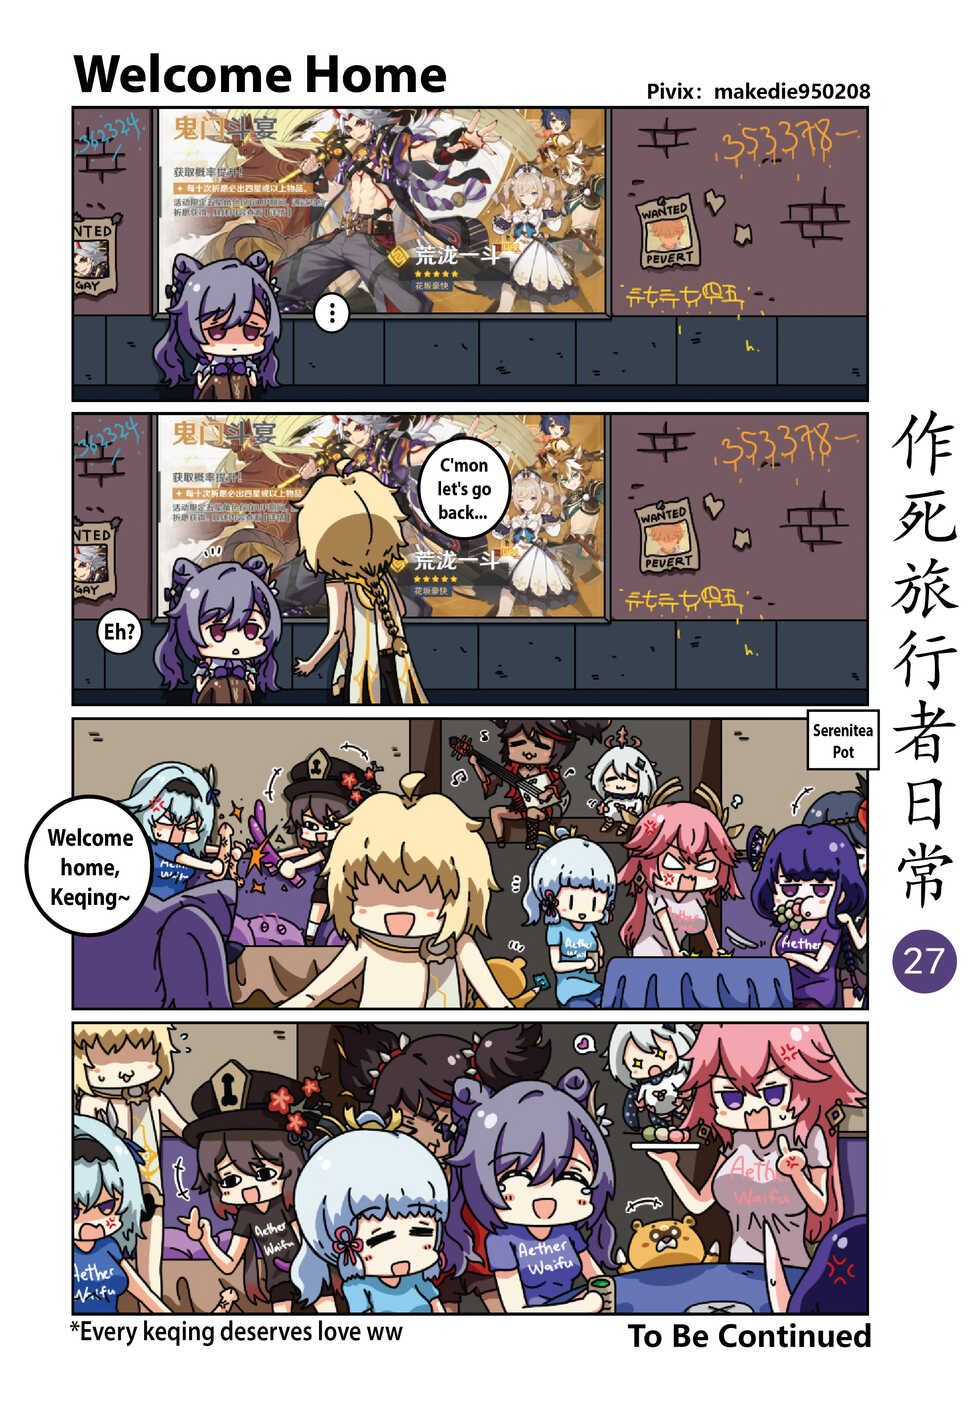 Makedie traveler daily life - Page 27